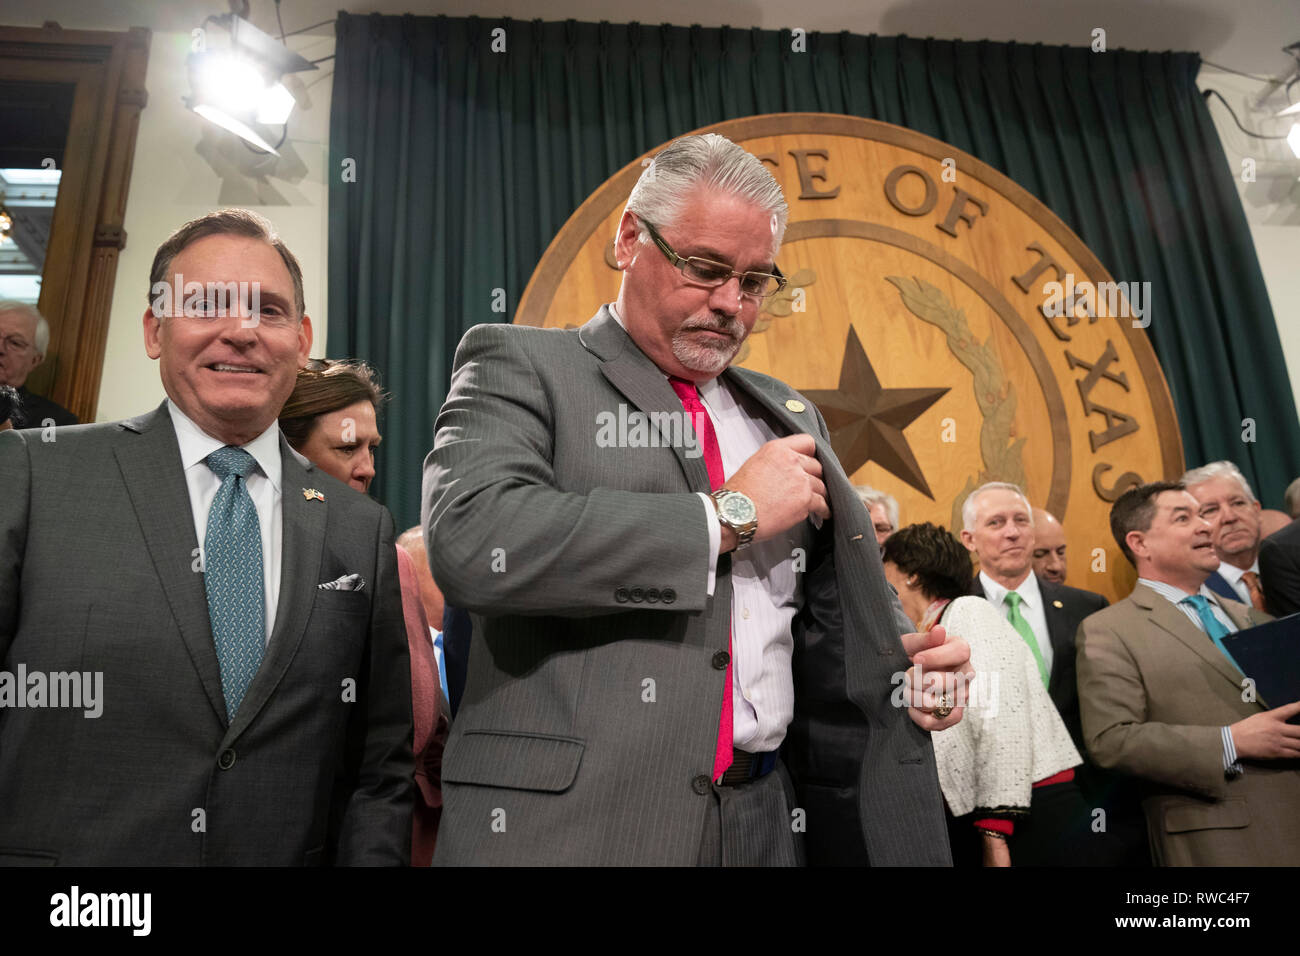 Texas House Public Education Committee Chairman Dan Huberty, R-Houston (center) prepares for a press conference at the Texas Capitol to discuss details of a proposed $9-billion public education spending plan. Rep. John Zerwas, R-Fort Bend, is at Huberty's side. Stock Photo